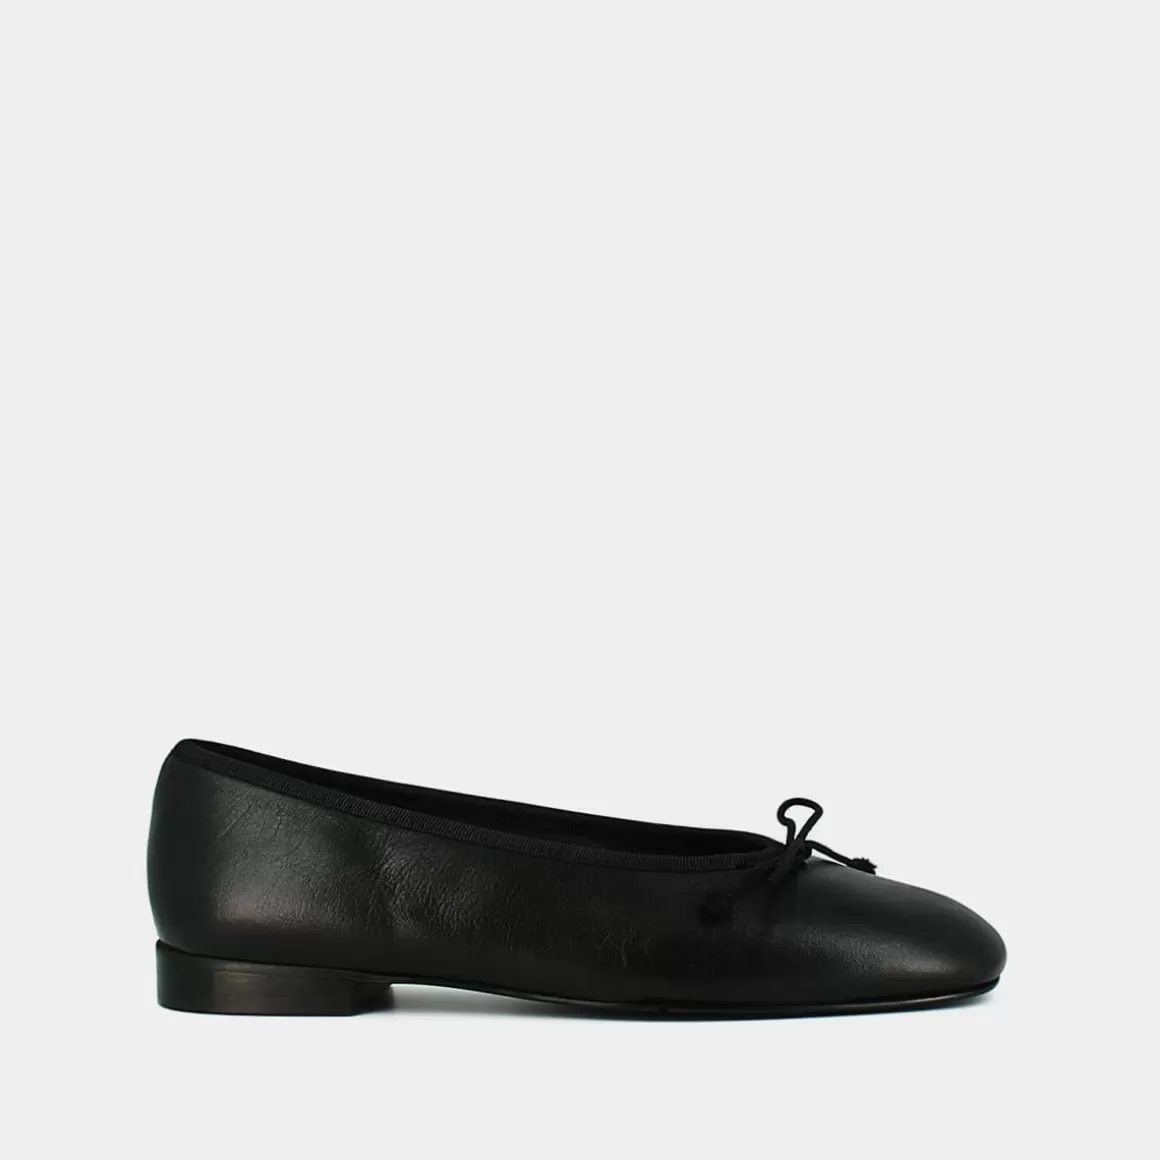 Ballerinas with rounded tips<Jonak Flash Sale